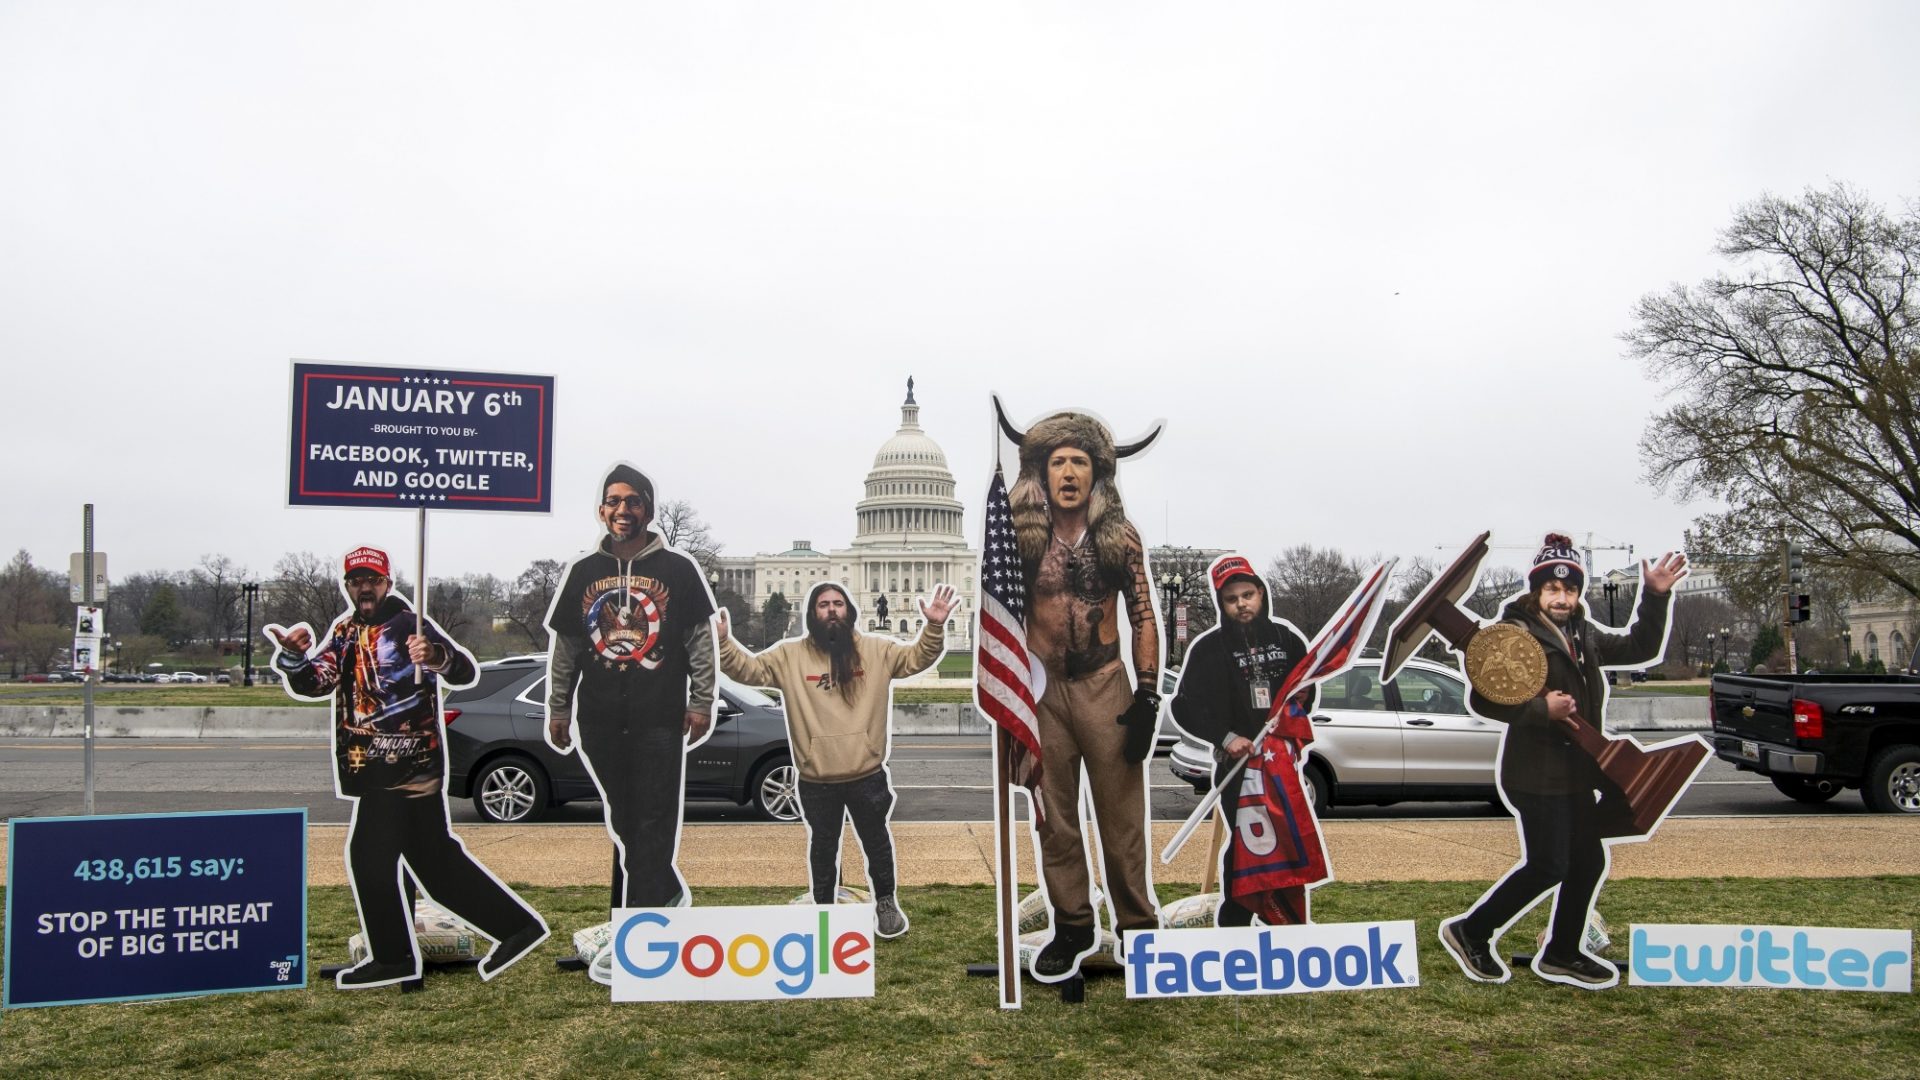 Cutouts of Mark Zuckerberg, CEO of Facebook, and of people involved in the US Capitol insurrection are used to highlight the role of social media in promoting extremism. Photo: Caroline Brehman/CQ-Roll Call/Getty